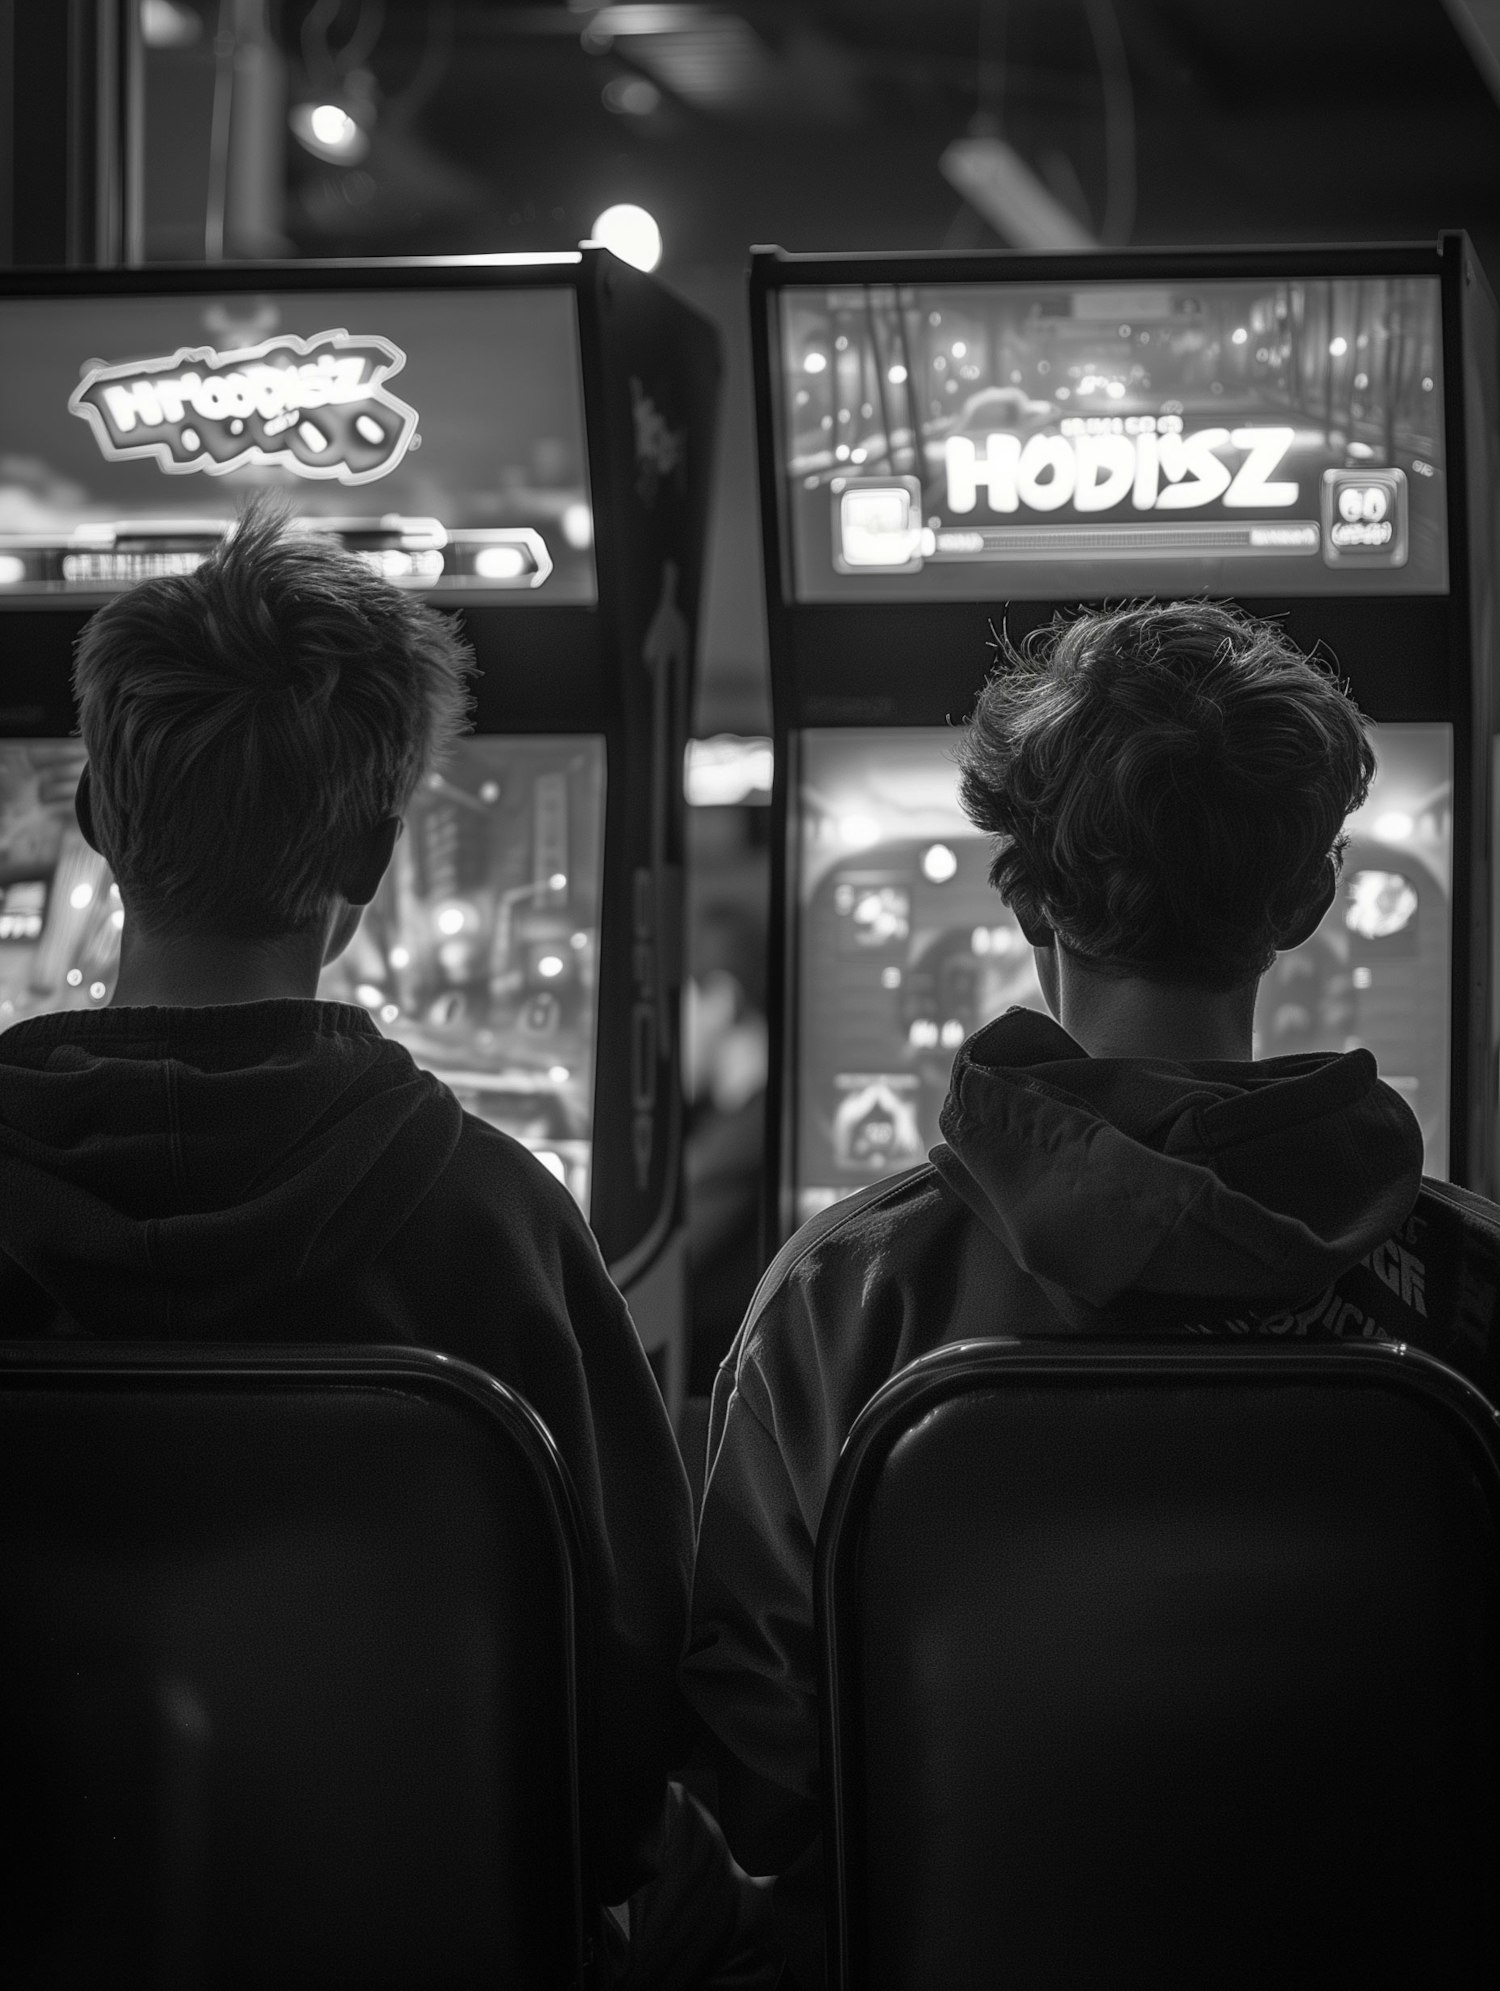 Teenagers at the Arcade